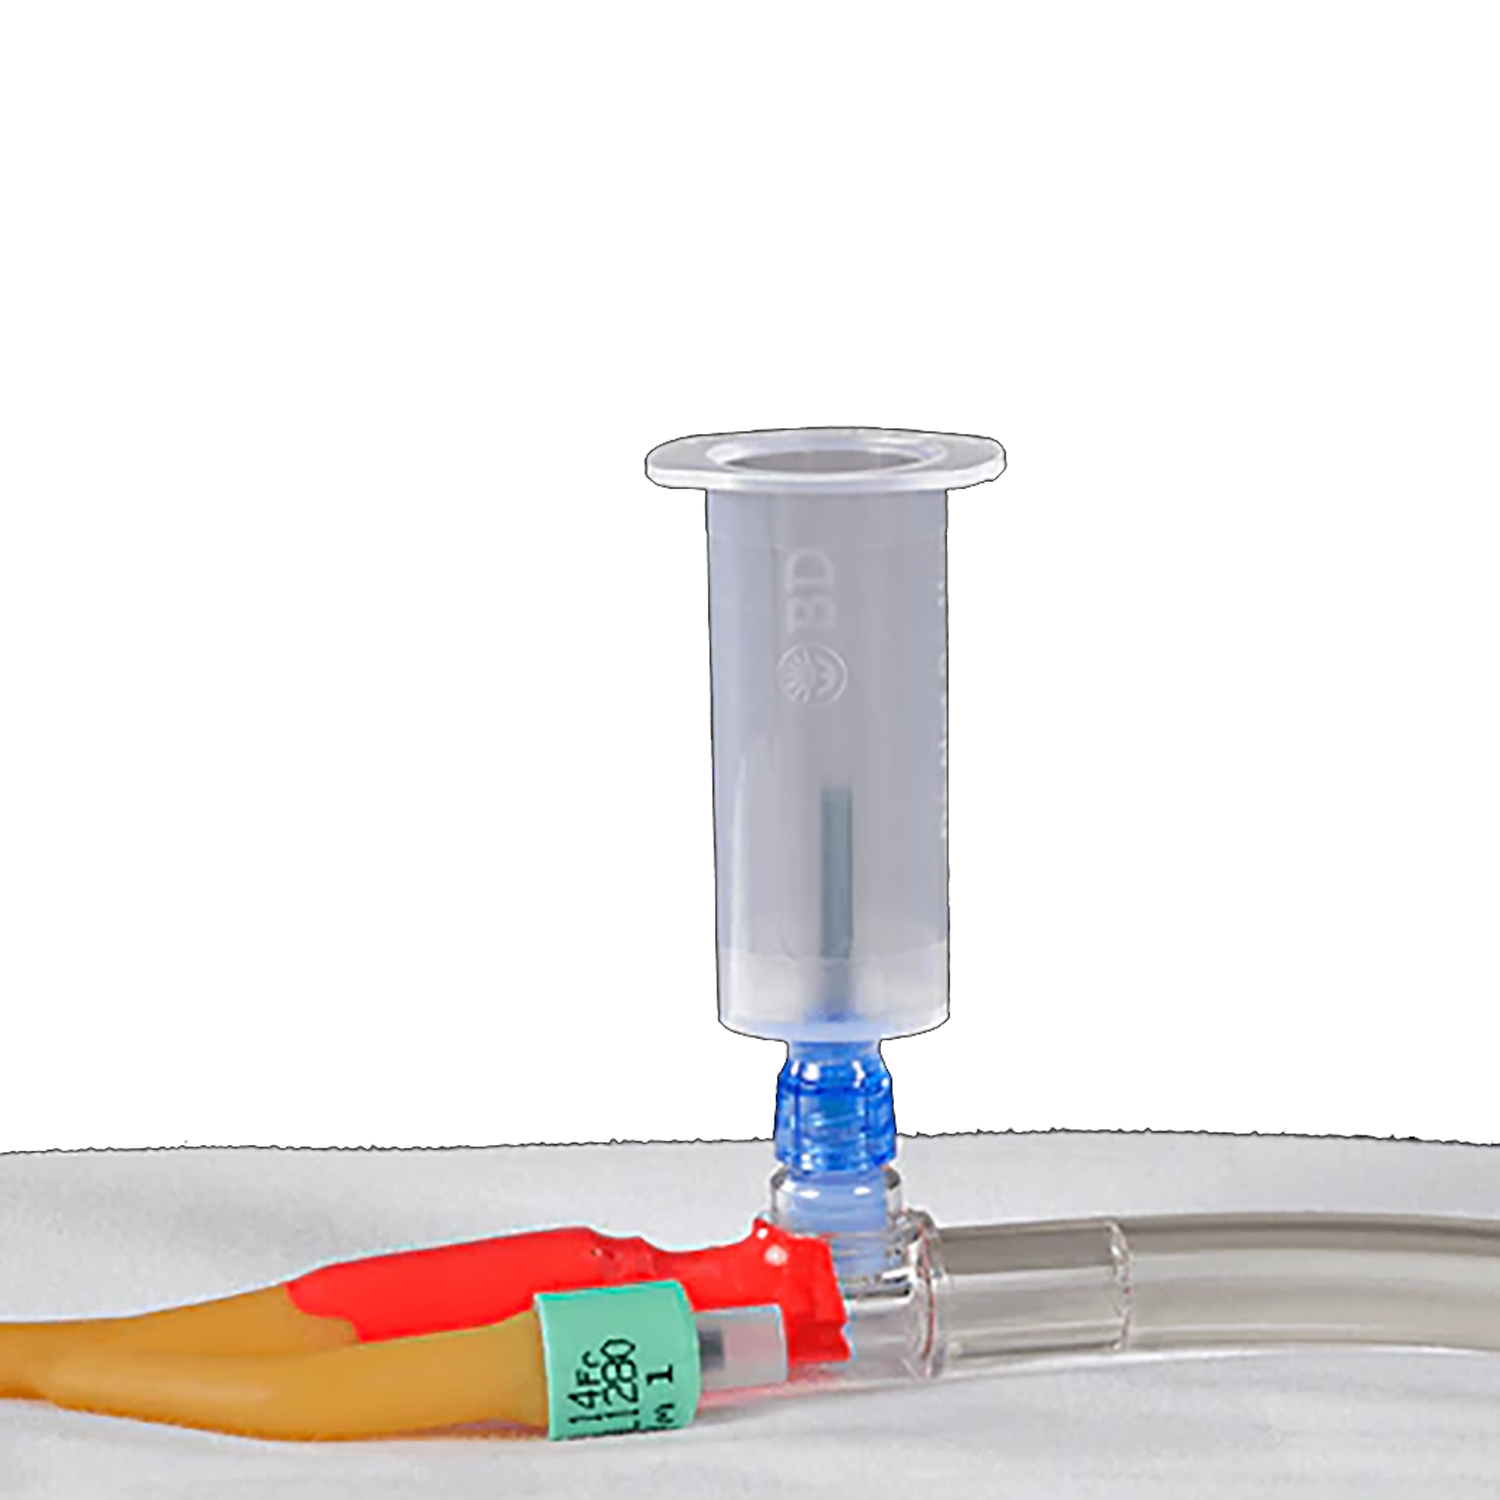 BD Vacutainer Luer-Lok Access Device | Pack of 198 (2)